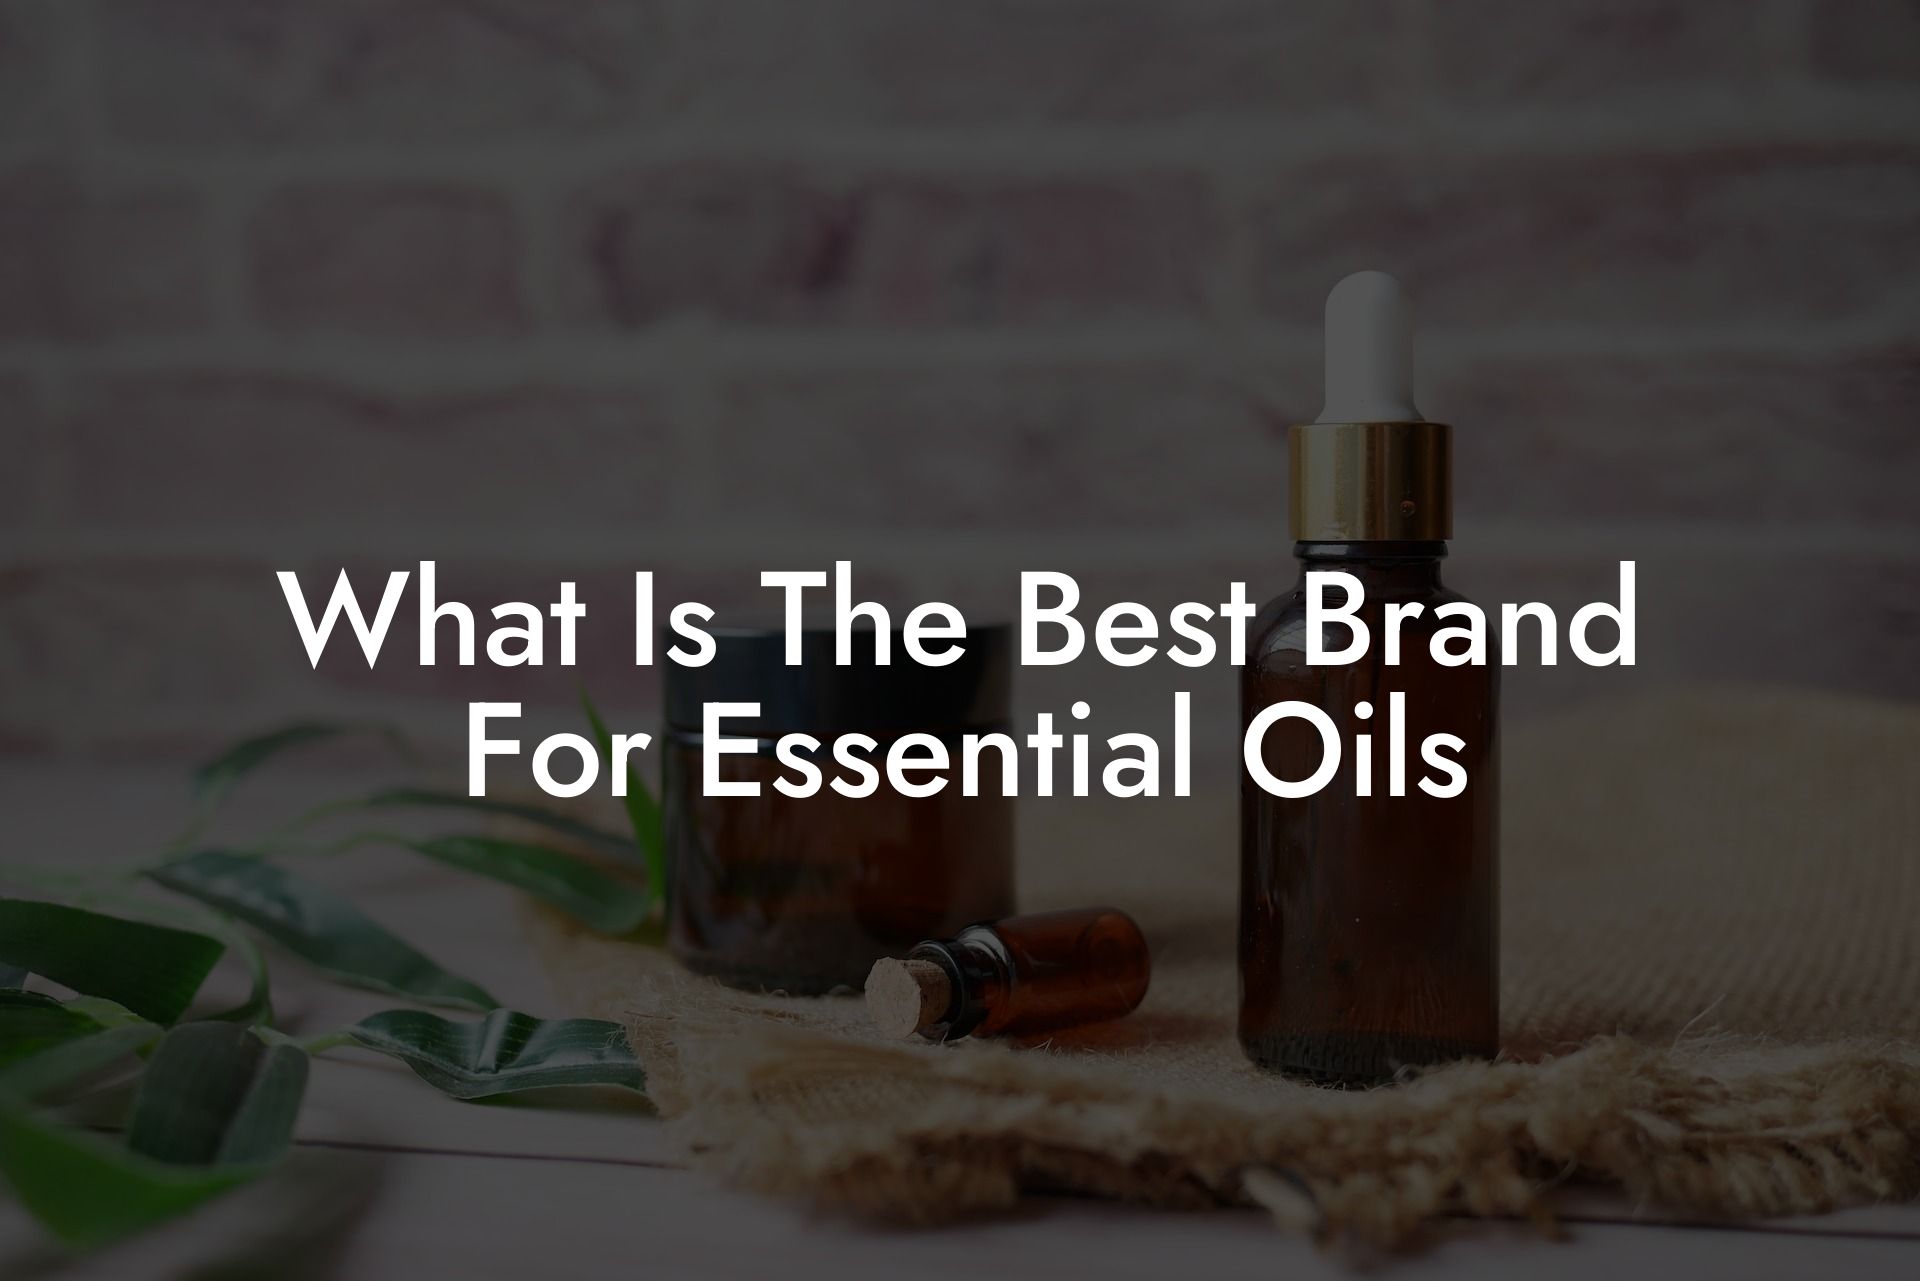 What Is The Best Brand For Essential Oils